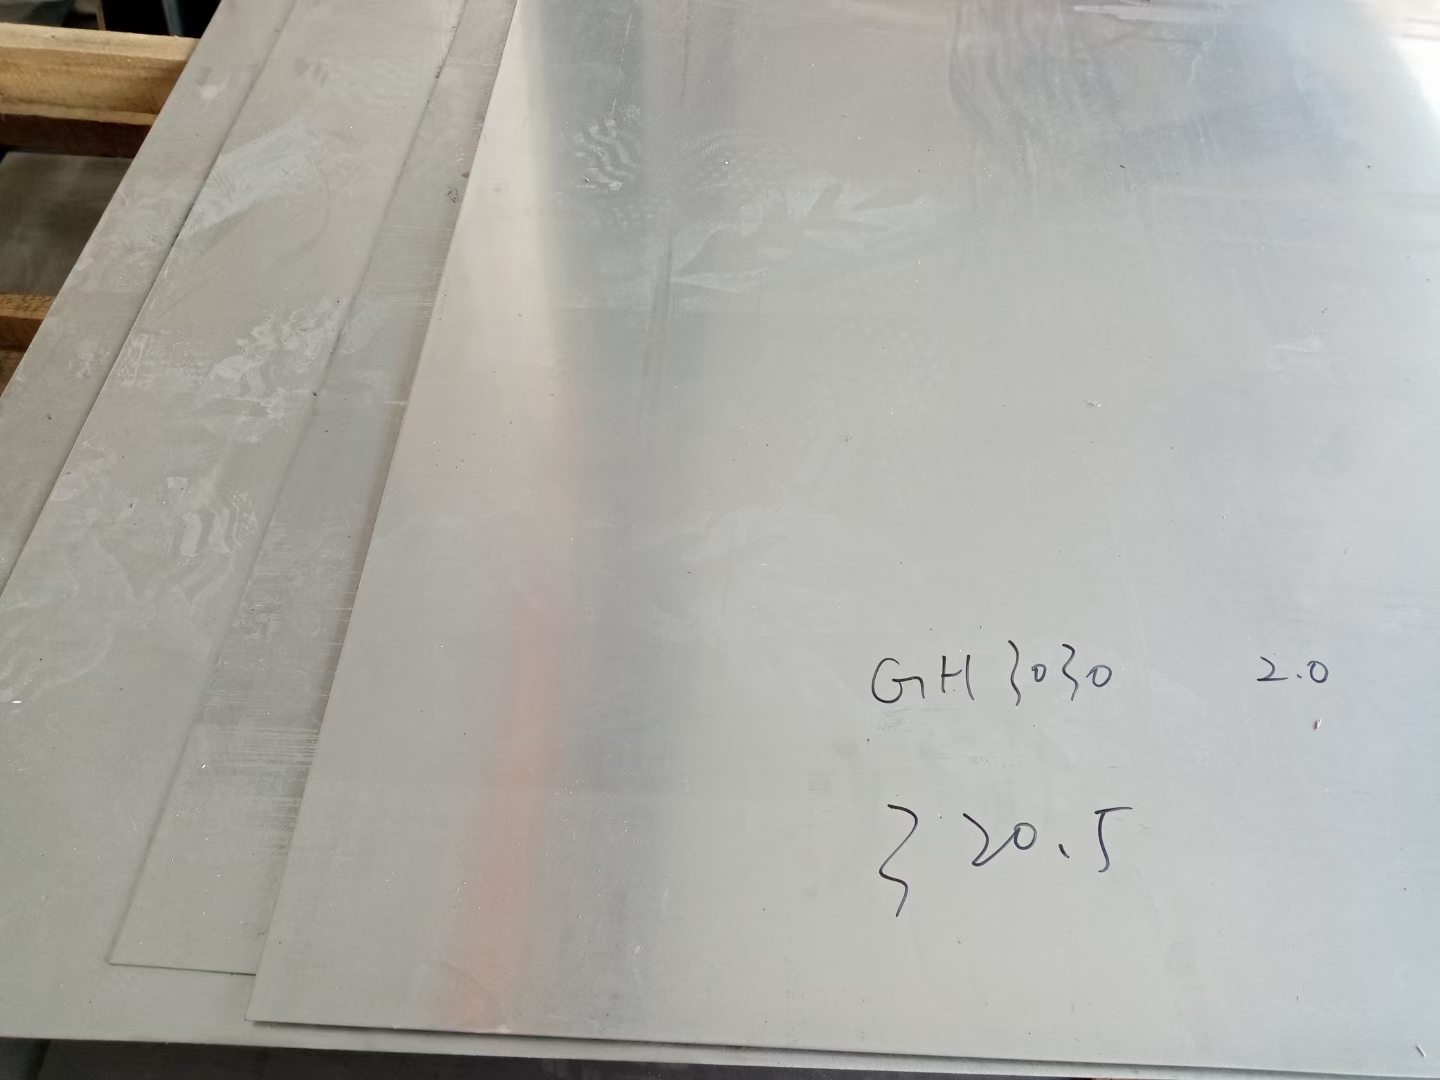 Hot sale Factory Cold Rolled Stainless Steel Sheets - Nickel GH3030 Superalloy sheet GH3030 High Temperature Alloy sheet – Cepheus